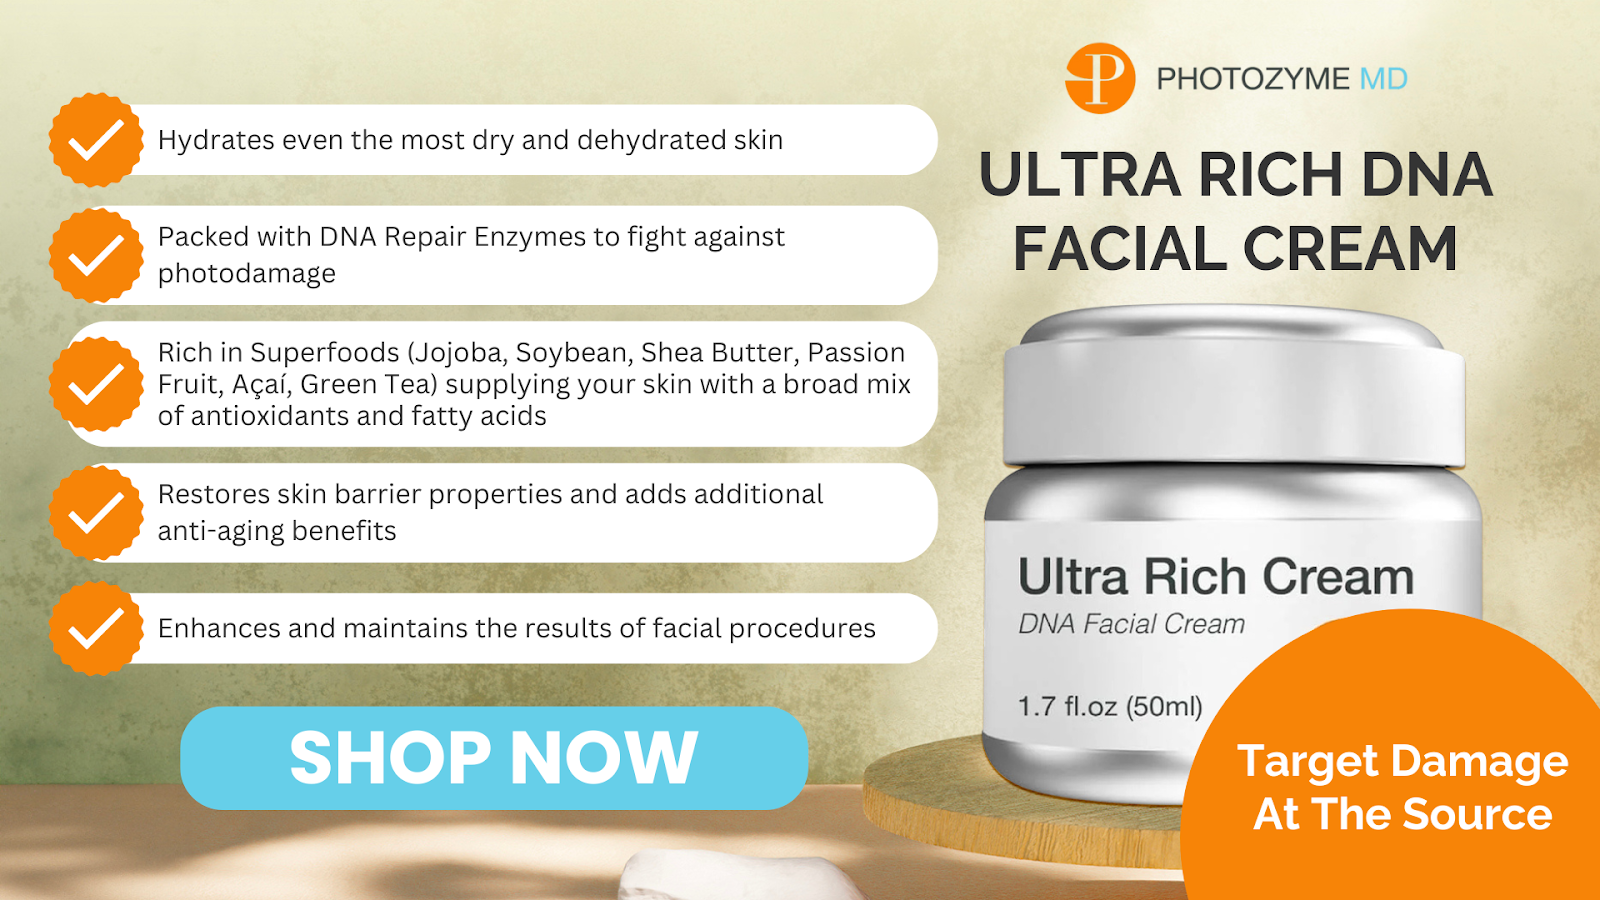 Photozyme offers a range of products to improve your skin